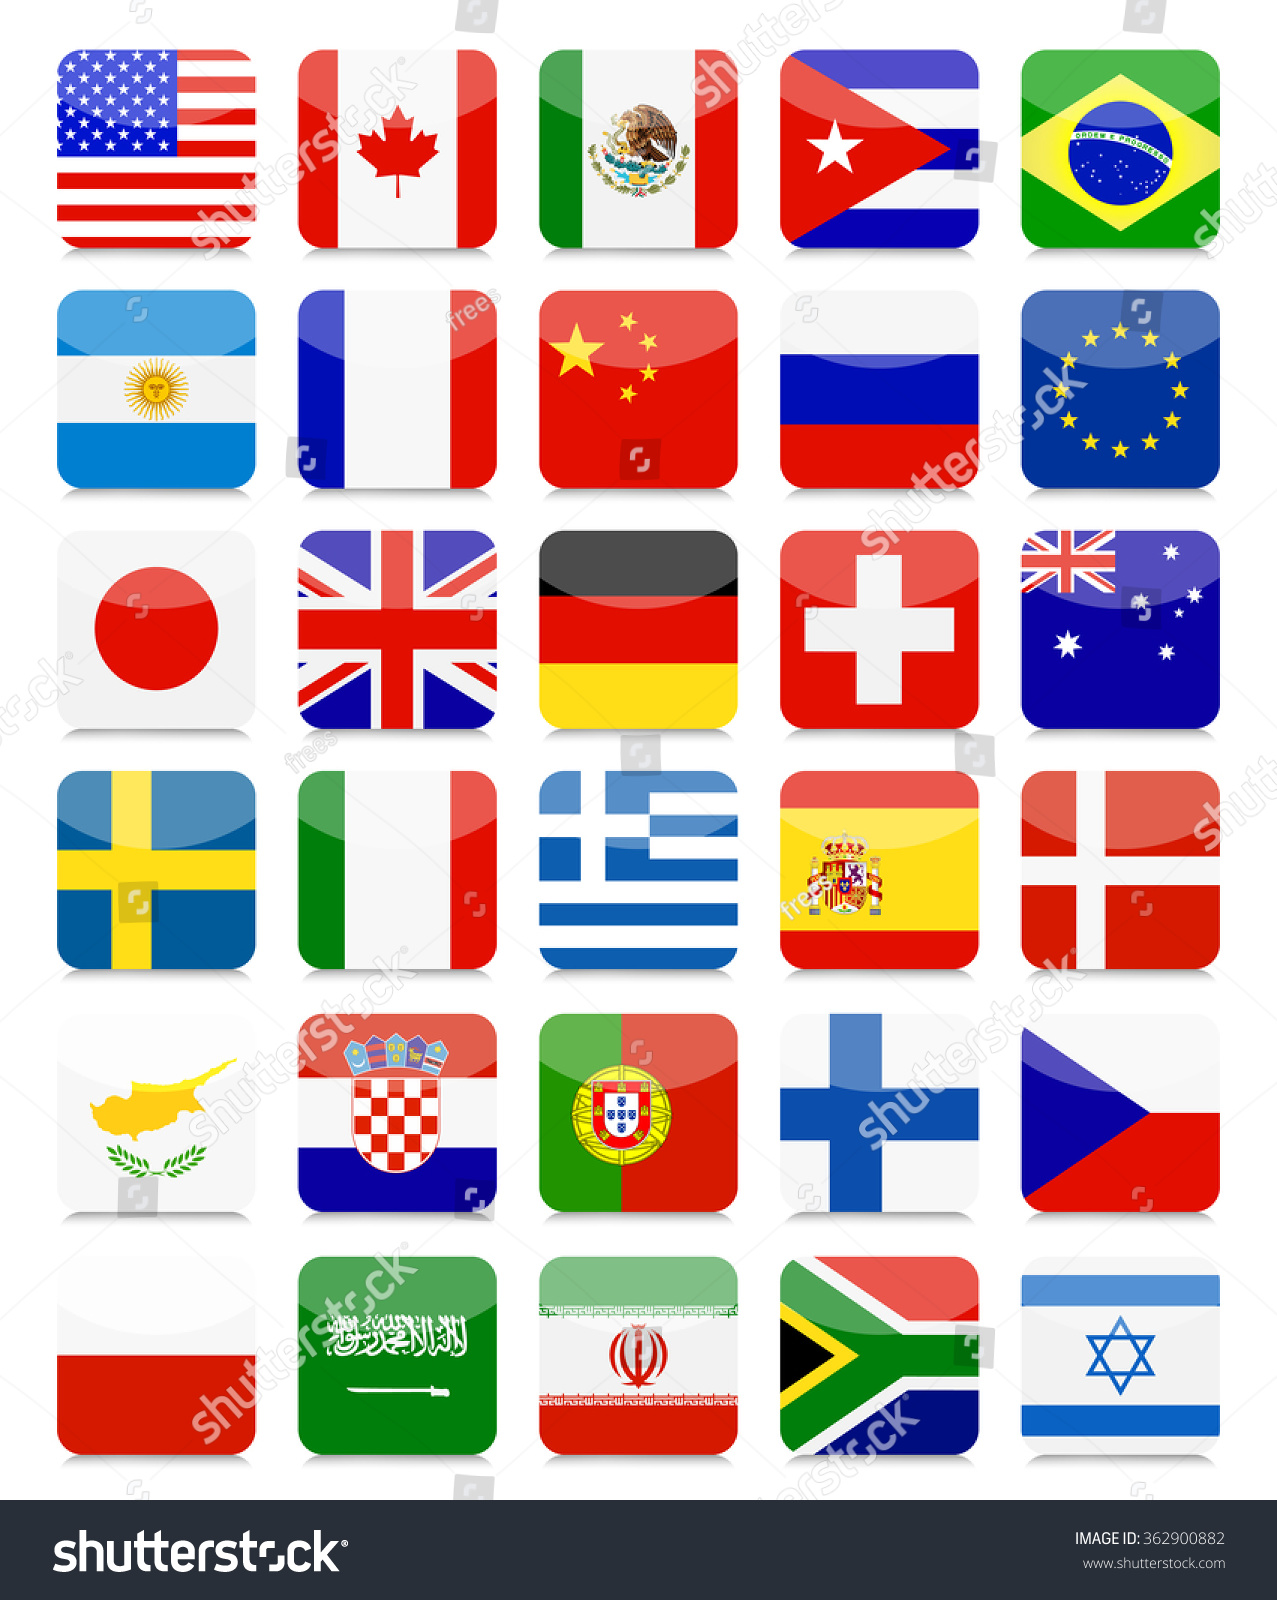 World Most Popular Square Flags Illustration High Res Vector Graphic Images